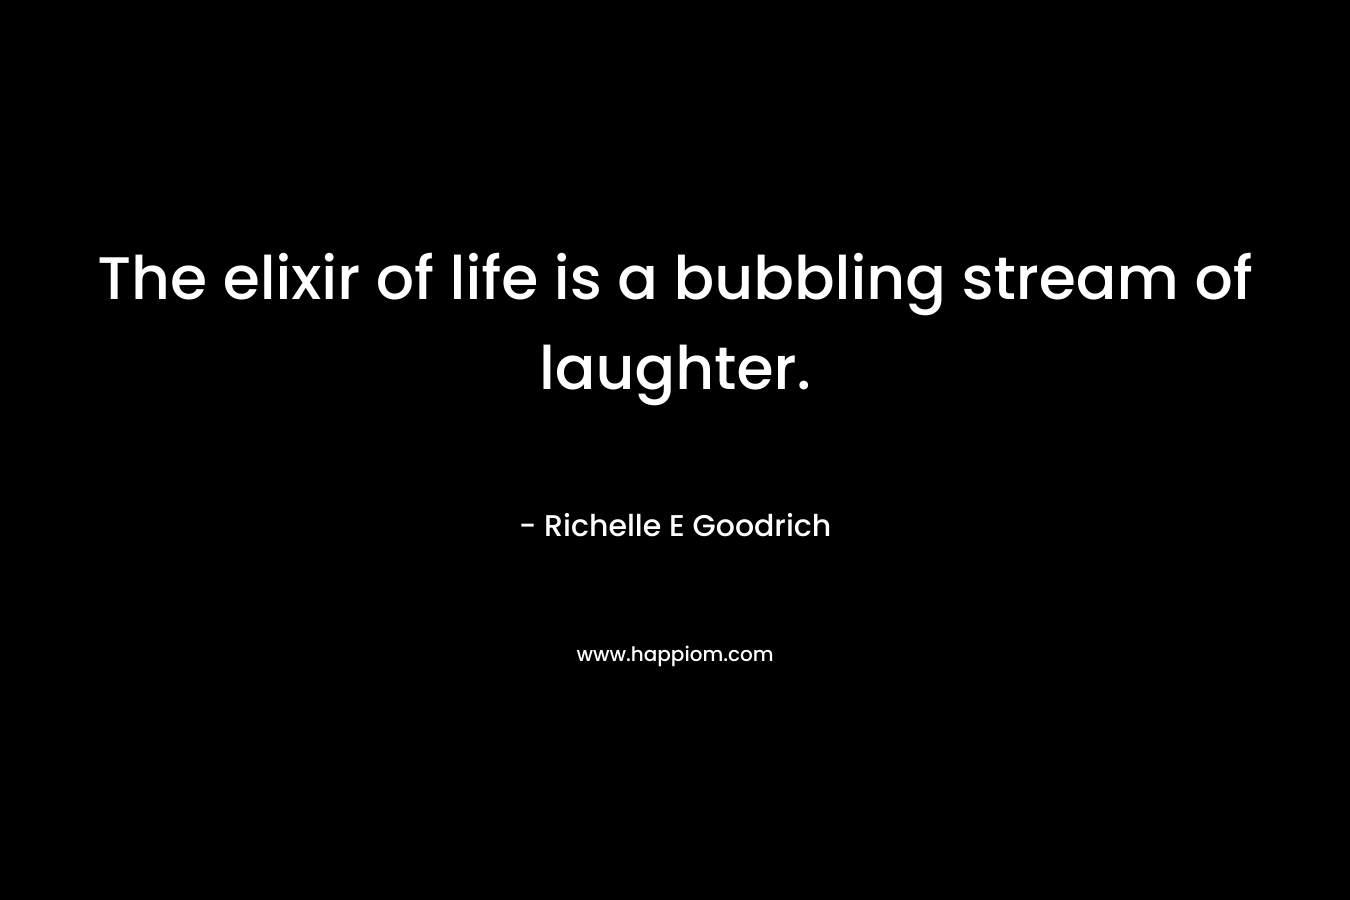 The elixir of life is a bubbling stream of laughter. – Richelle E Goodrich